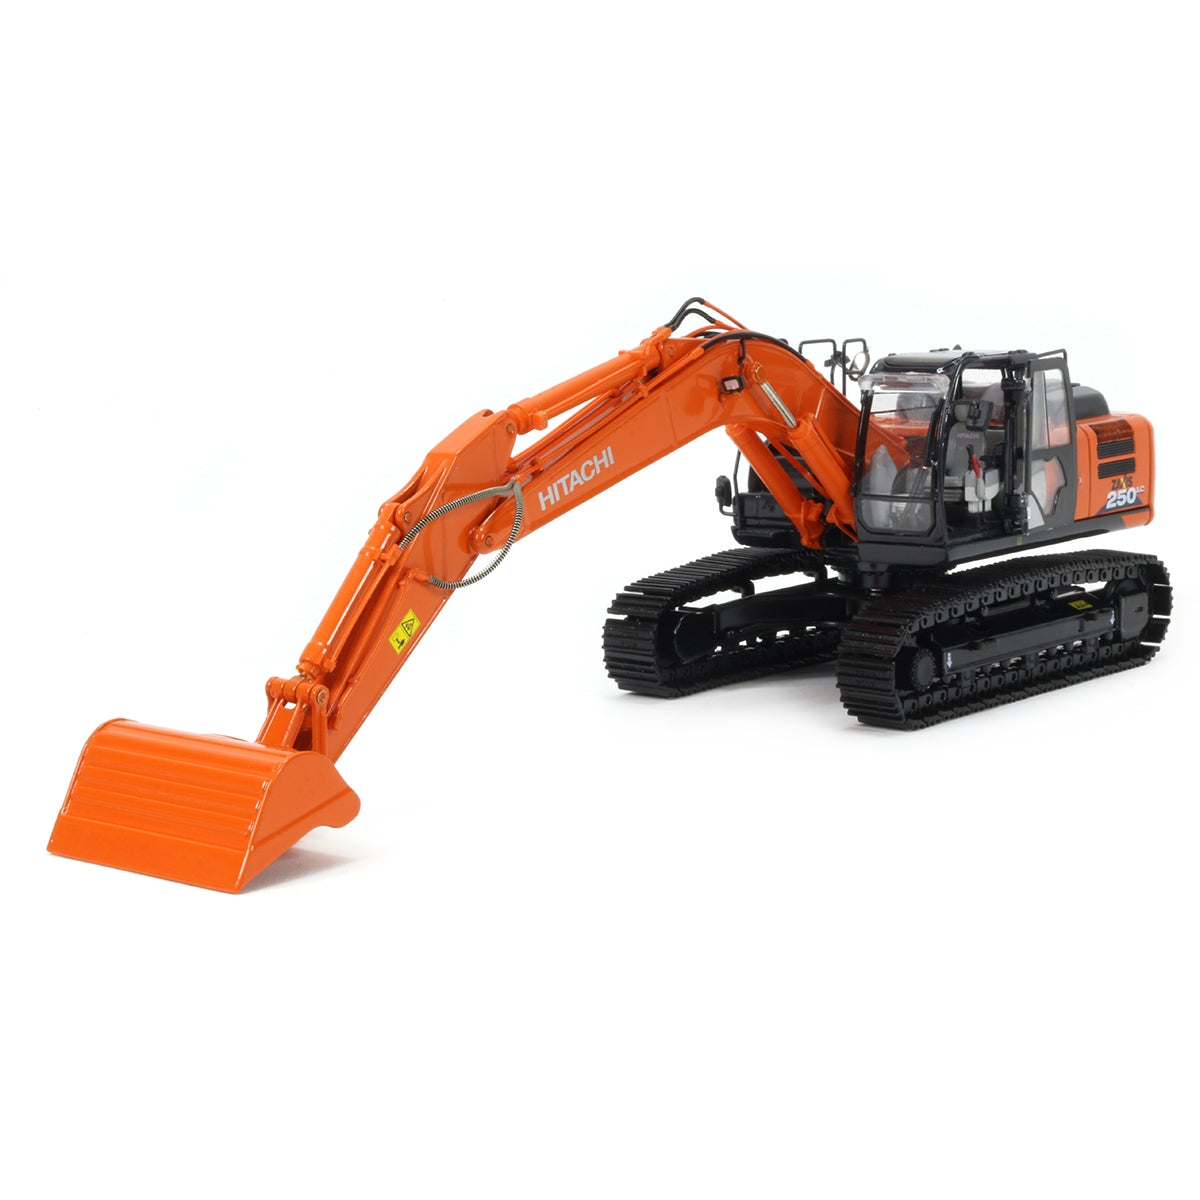 Scale ZX250LC-6 Hydraulic excavator